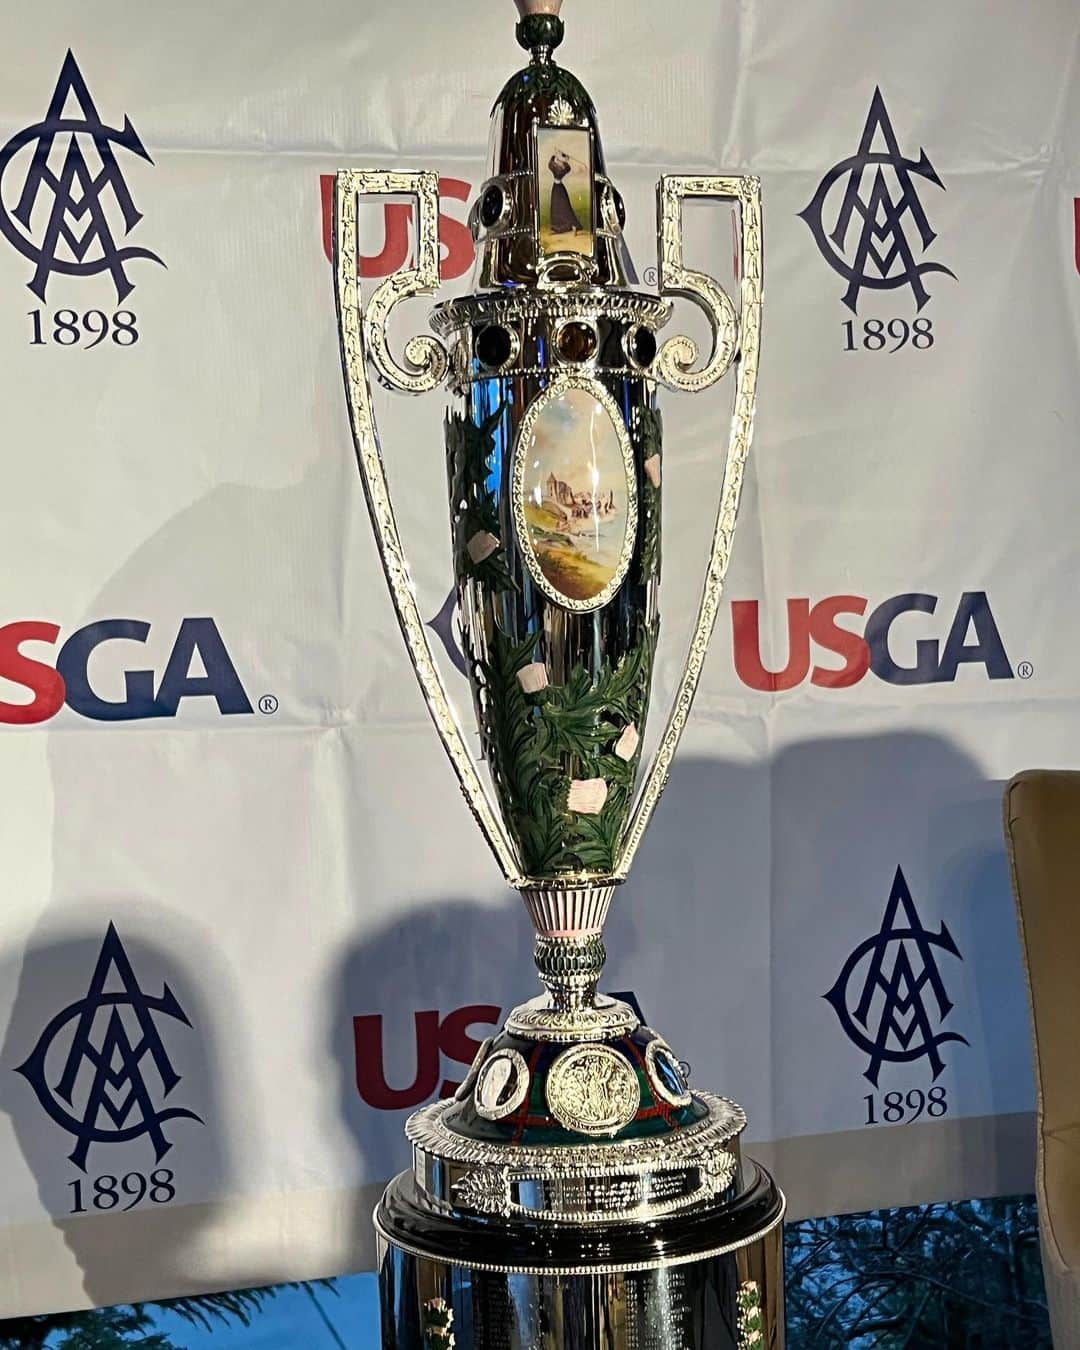 ジェーン・パークのインスタグラム：「The Robert Cox Trophy was donated by Robert Cox of Scotland who was a member of British Parliament and a course designer. It’s the longest serving original USGA trophy having first been presented in 1896.   I had the honor of winning this gorgeous piece of hardware as a 17yo. It is encrusted with thistles, surmounted in plaid enamel and inlayed with cairngorm gemstones.  I was teased and bullied for playing golf in high school. It was considered an old man sport back then. After my win, senior year began and I didn’t speak a word of my accomplishment to the other students.   I get called out of class on the INTERCOM into the principals office. I thought I was in trouble, but hardly was the type to cause any. Being called out like this in front of my peers was humiliating! I was so uncool already. I nervously walked into his office and he invited me to have a seat. Here’s how the conversation went:  P: Your name is Jane and you play golf?  Me: yep  P: that’s so funny… there’s another girl named Jane Park who won the U.S. Women’s Amateur this summer and she lives in Rancho Cucamonga too.   Me: ……  After speaking for a bit, a lightbulb went off in his head and he couldn’t believe it was me. He was a huge golf fan and was SO DANG PROUD to have me in his school. He suggested bringing the trophy in and displaying it in the front office lobby and I could feel my cheeks go flush from the embarrassment. It was displayed in view of his office window and he loved marveling at it. Students that walked by could not give a crap about it.   The principal then did a video collage of my win that aired in every class on Monday. I could have died of embarrassment.  Only a few years later did I realize it was my honor to have held this trophy in my possession for a year and that I should be nothing but proud. With names like Babe Zaharias, Louis Suggs, Beth Daniel, Juli Inkster just to name a few - to have my name permanently etched on that piece of history is something I will always look back on fondly.   Being able to share this night with my family and friends was icing on the cake and Grace was the sweet cherry on top.   Thank you @atlantaathclub for an amazing night.」